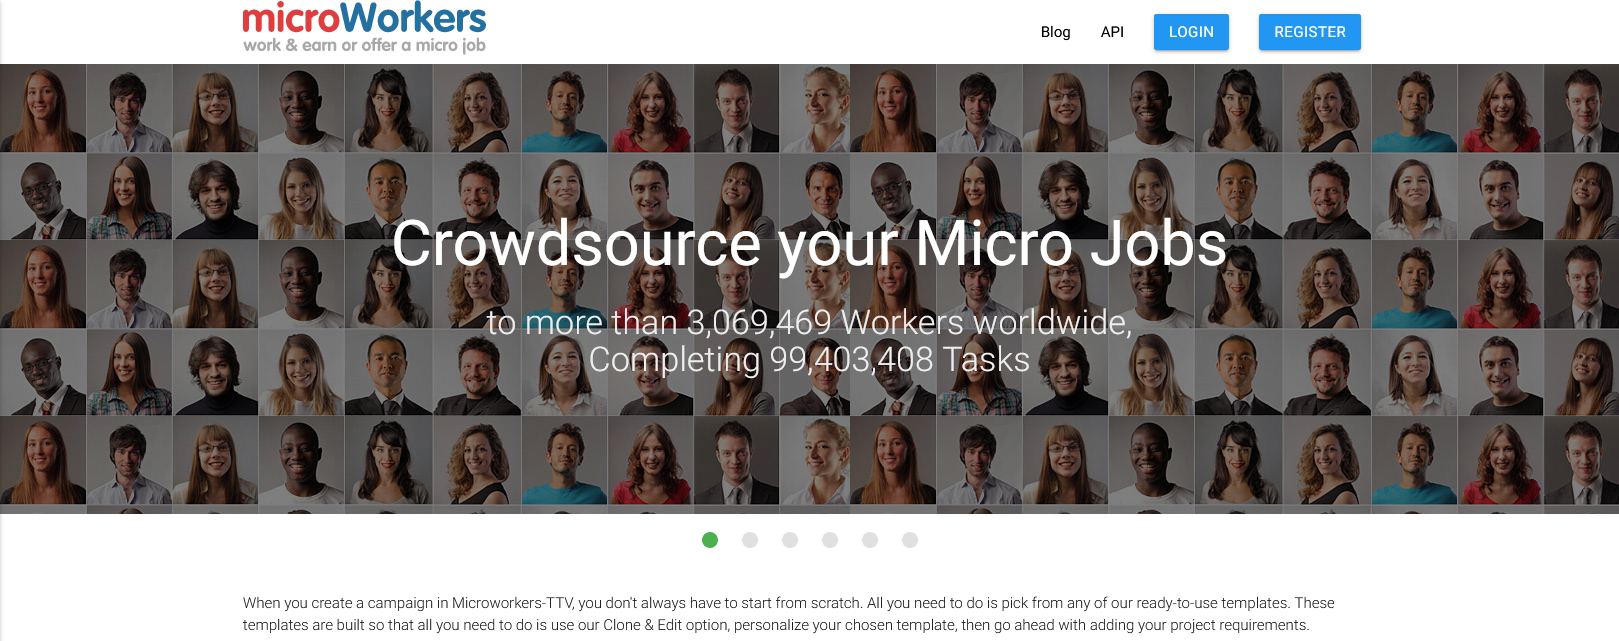 Microworkers Review make money fast micro jobs